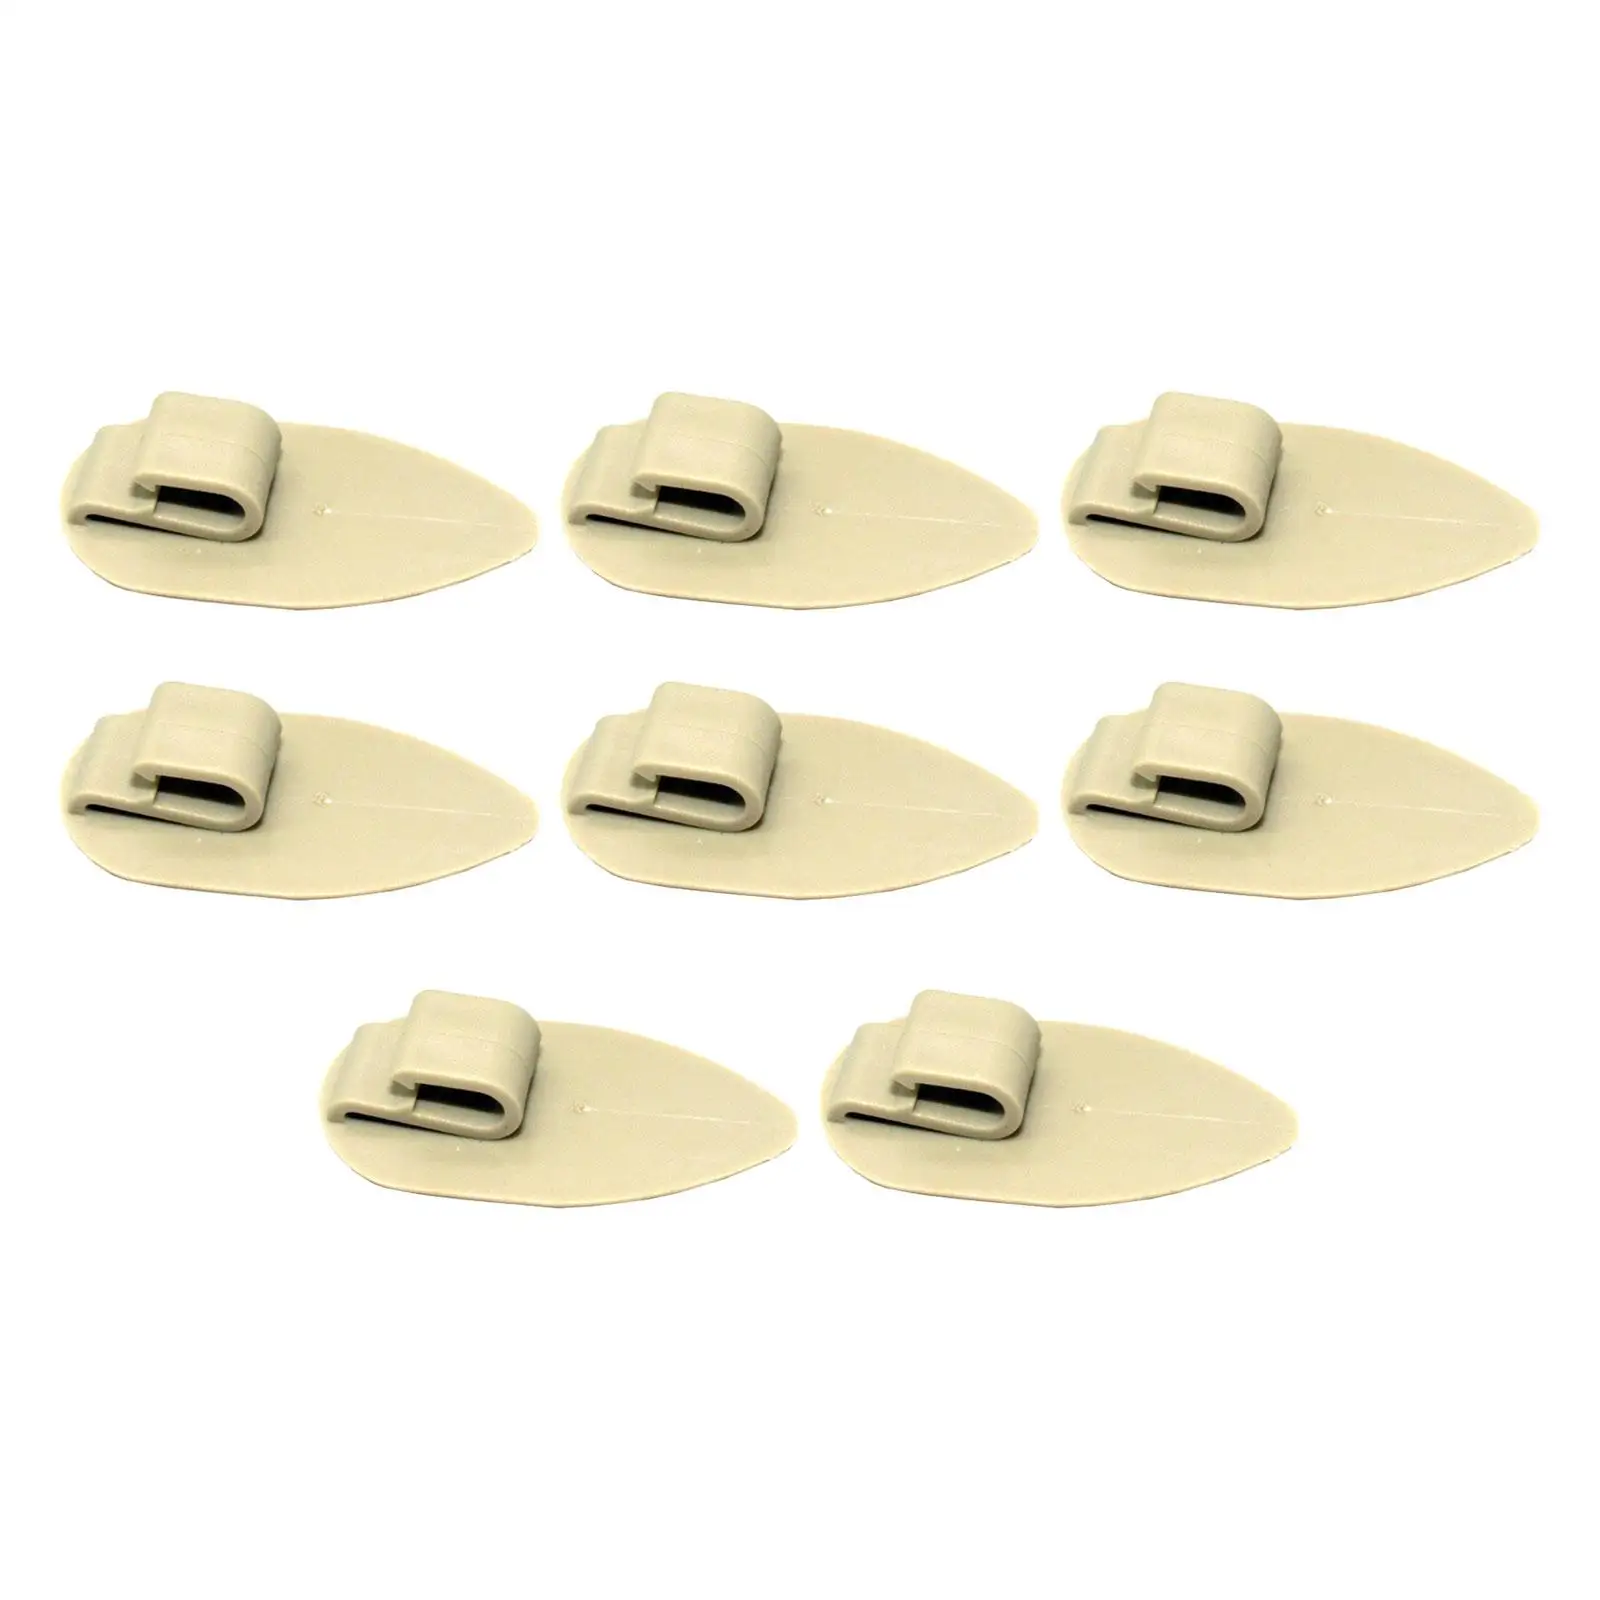 8x Floor Mat Retainer Clips Anti Skid Mat Fastener Clips for Car Mats Auto Accessories Replaces Quality Easy Installation